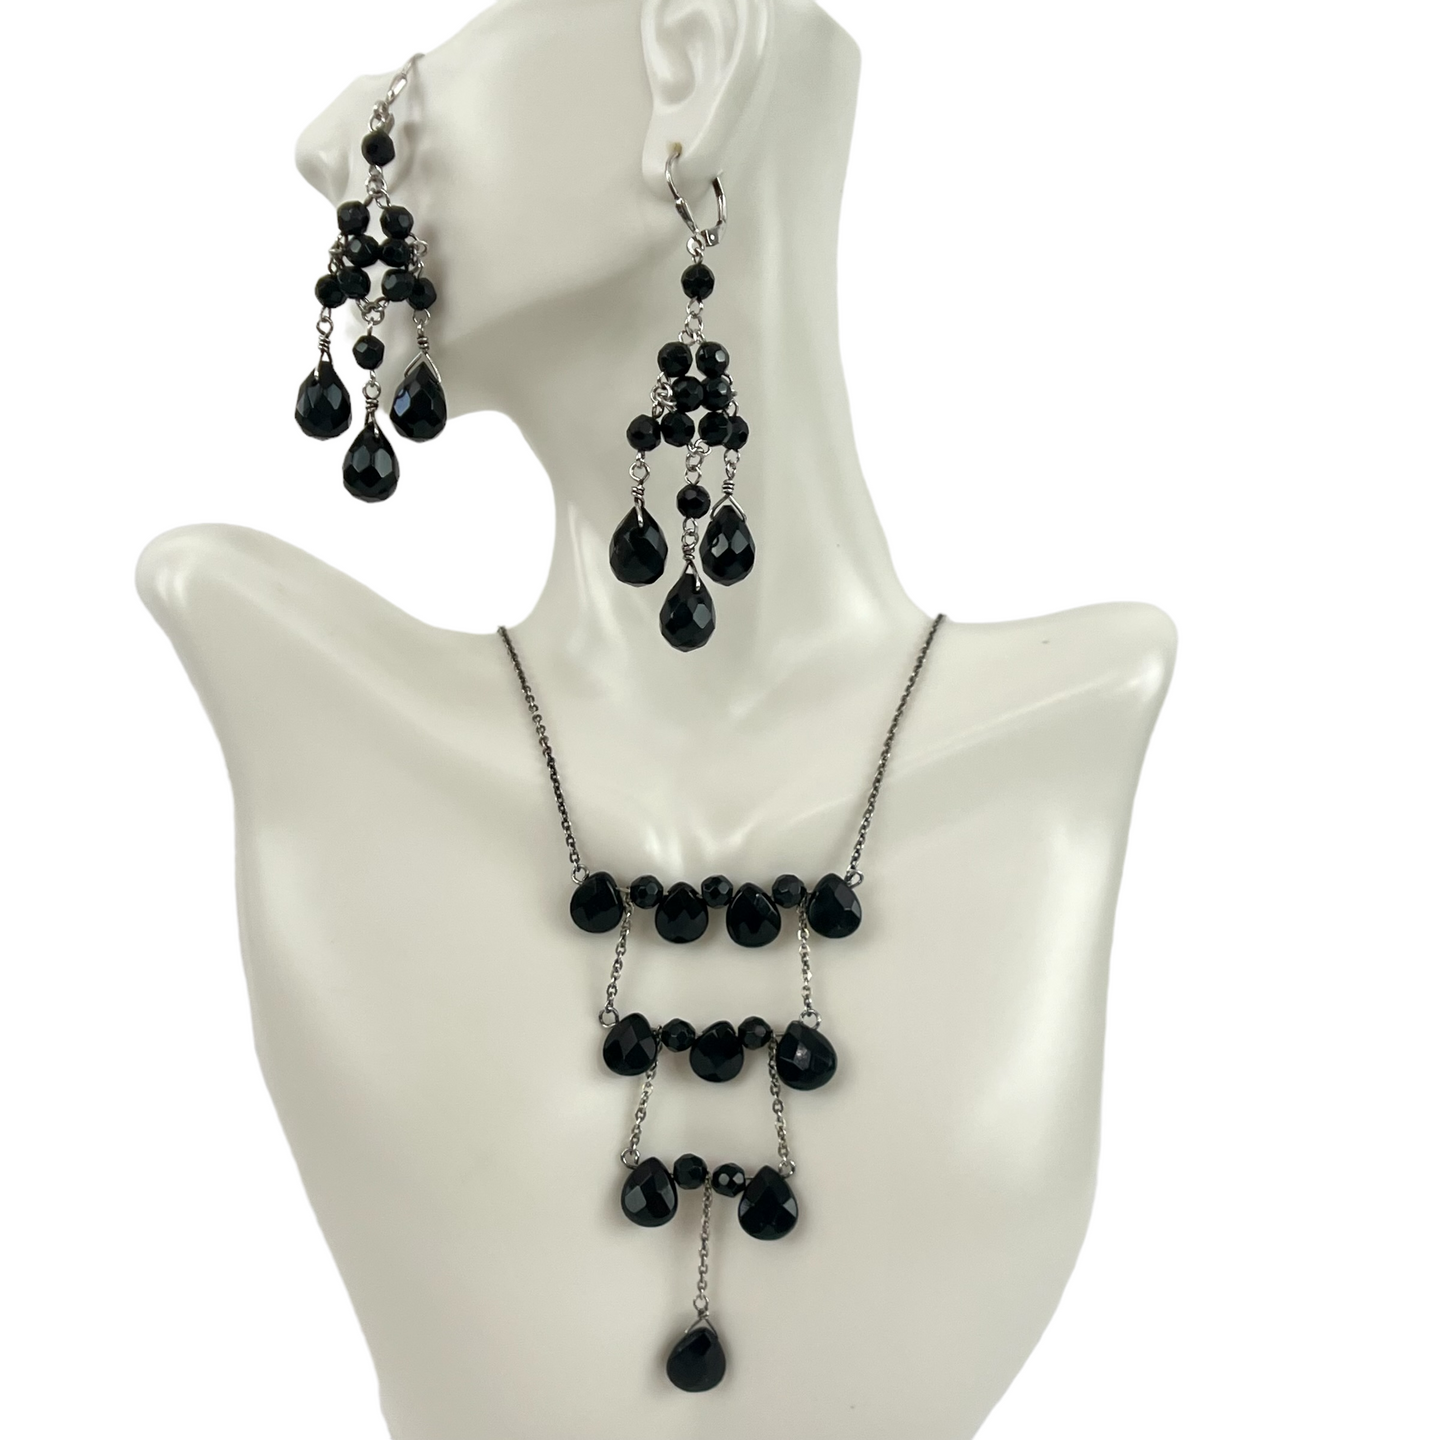 Vintage Black Faceted Stones on 925 Necklace and Earrings Set